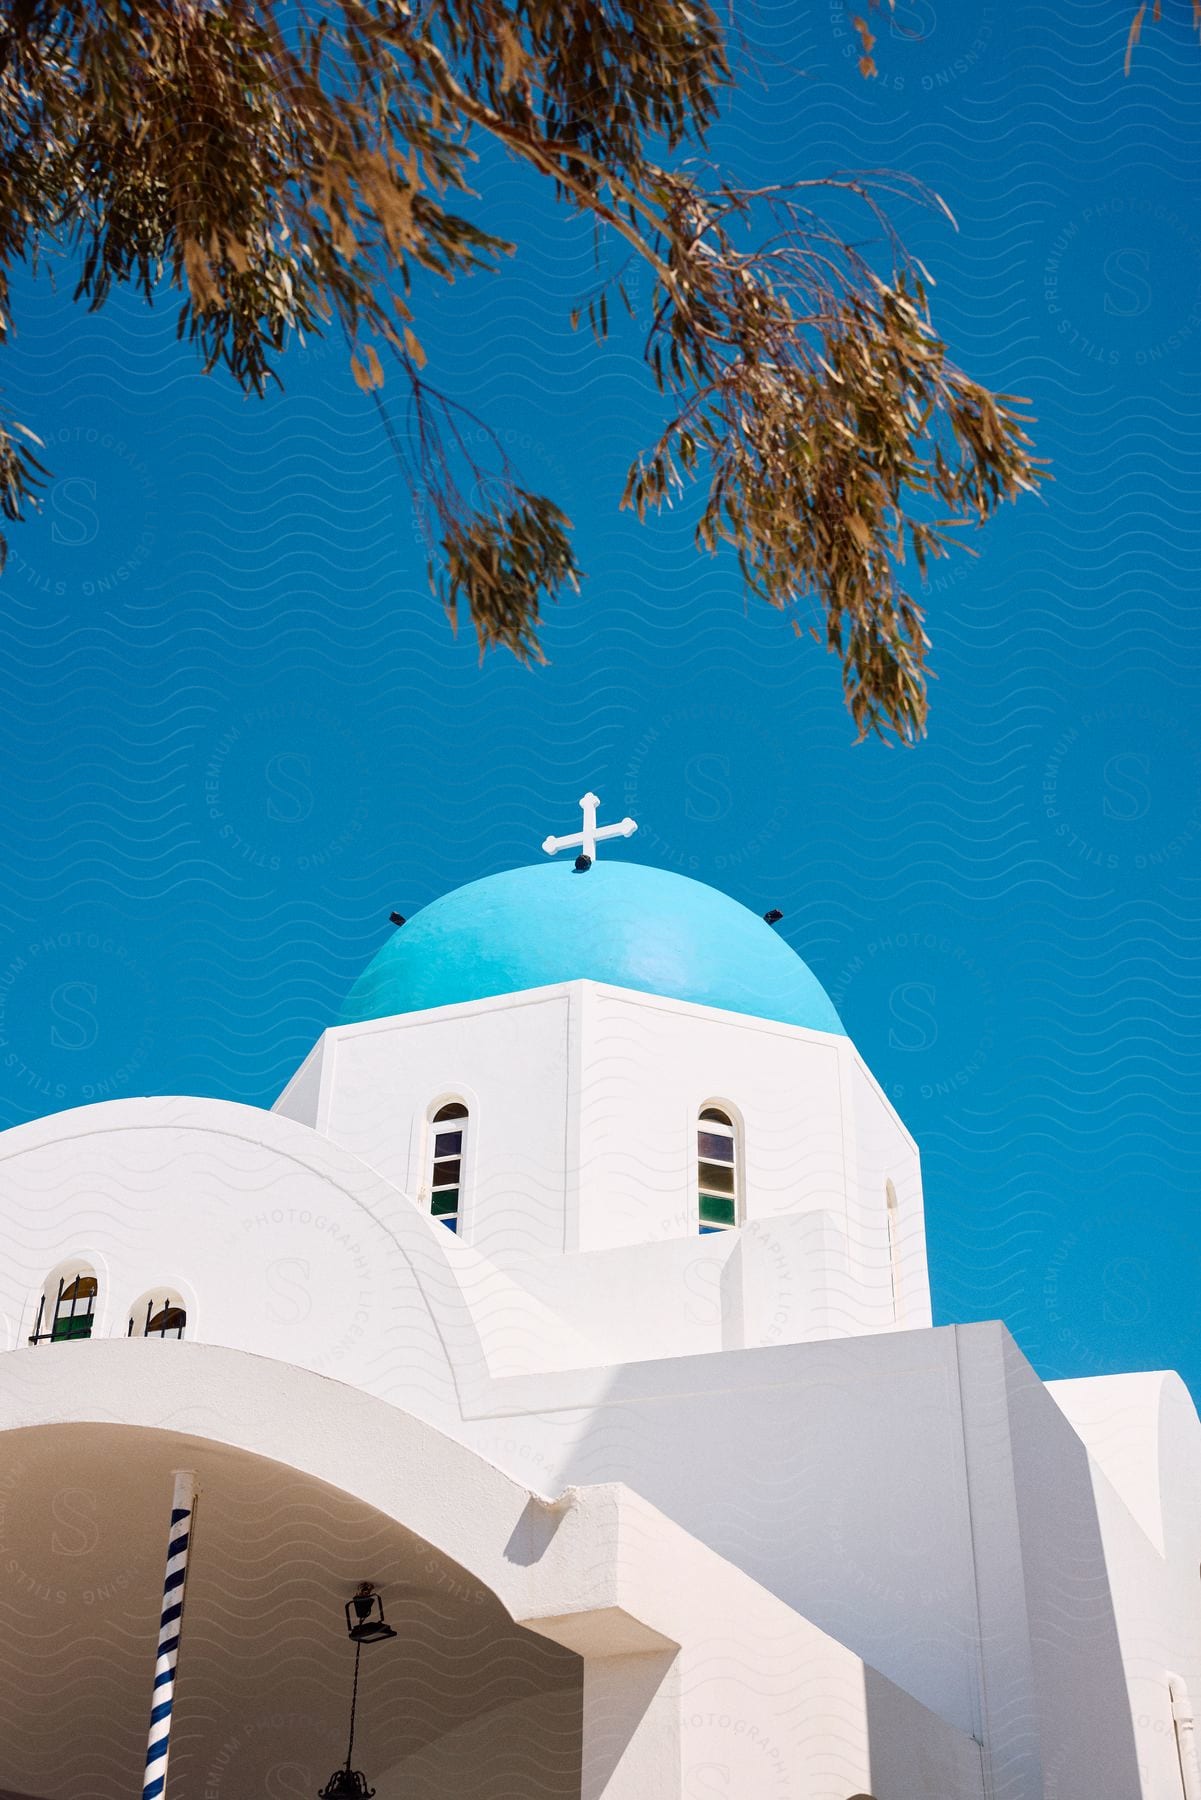 A tree grows near a domed mosque under a clear blue sky